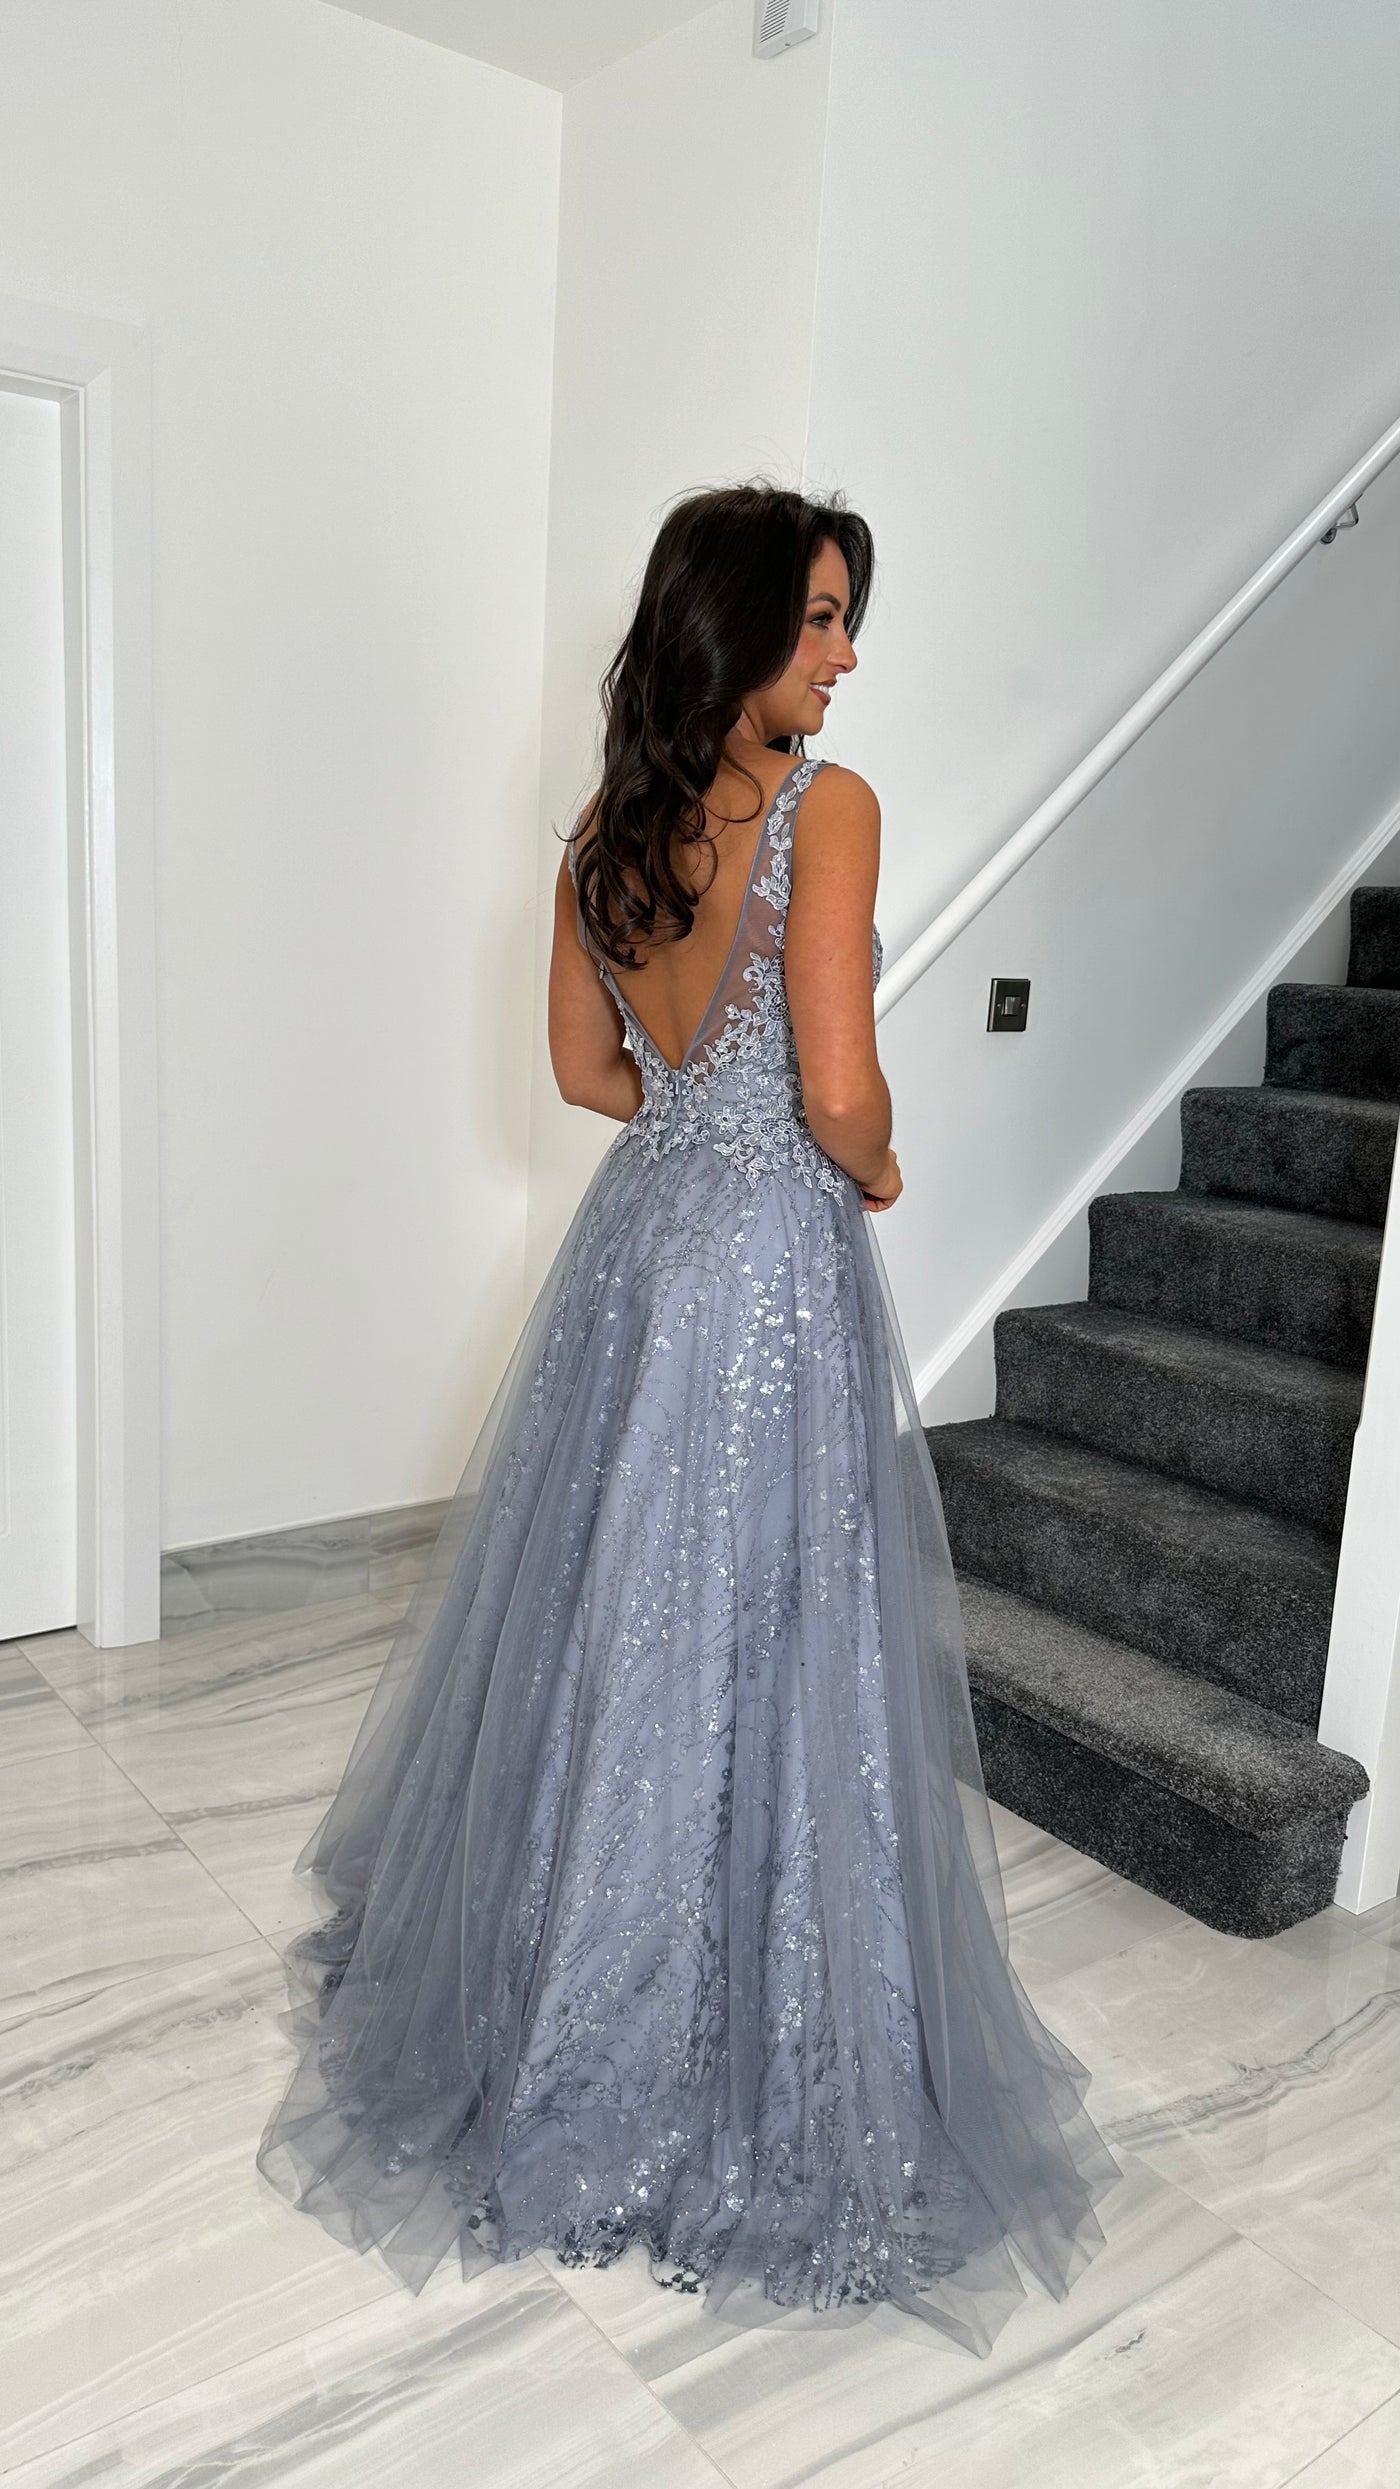 Embellished Ball Gown Prom Dress In Bracing Blue